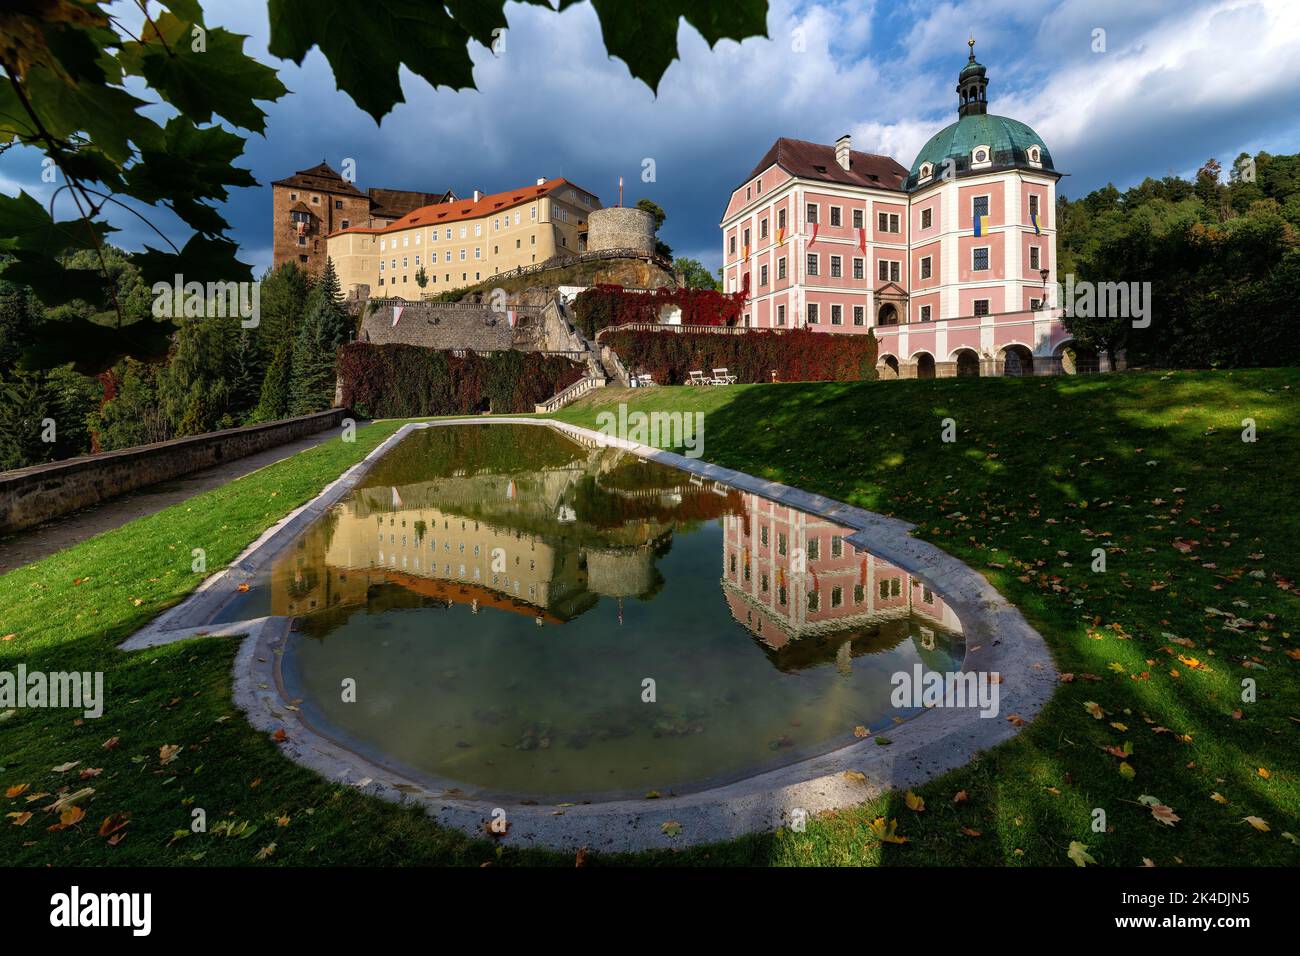 State Castle and Chateau in the city  Bečov nad Teplou in the western part of the Czech Republic - Karlovy Vary Region - Czech Republic, Europe Stock Photo